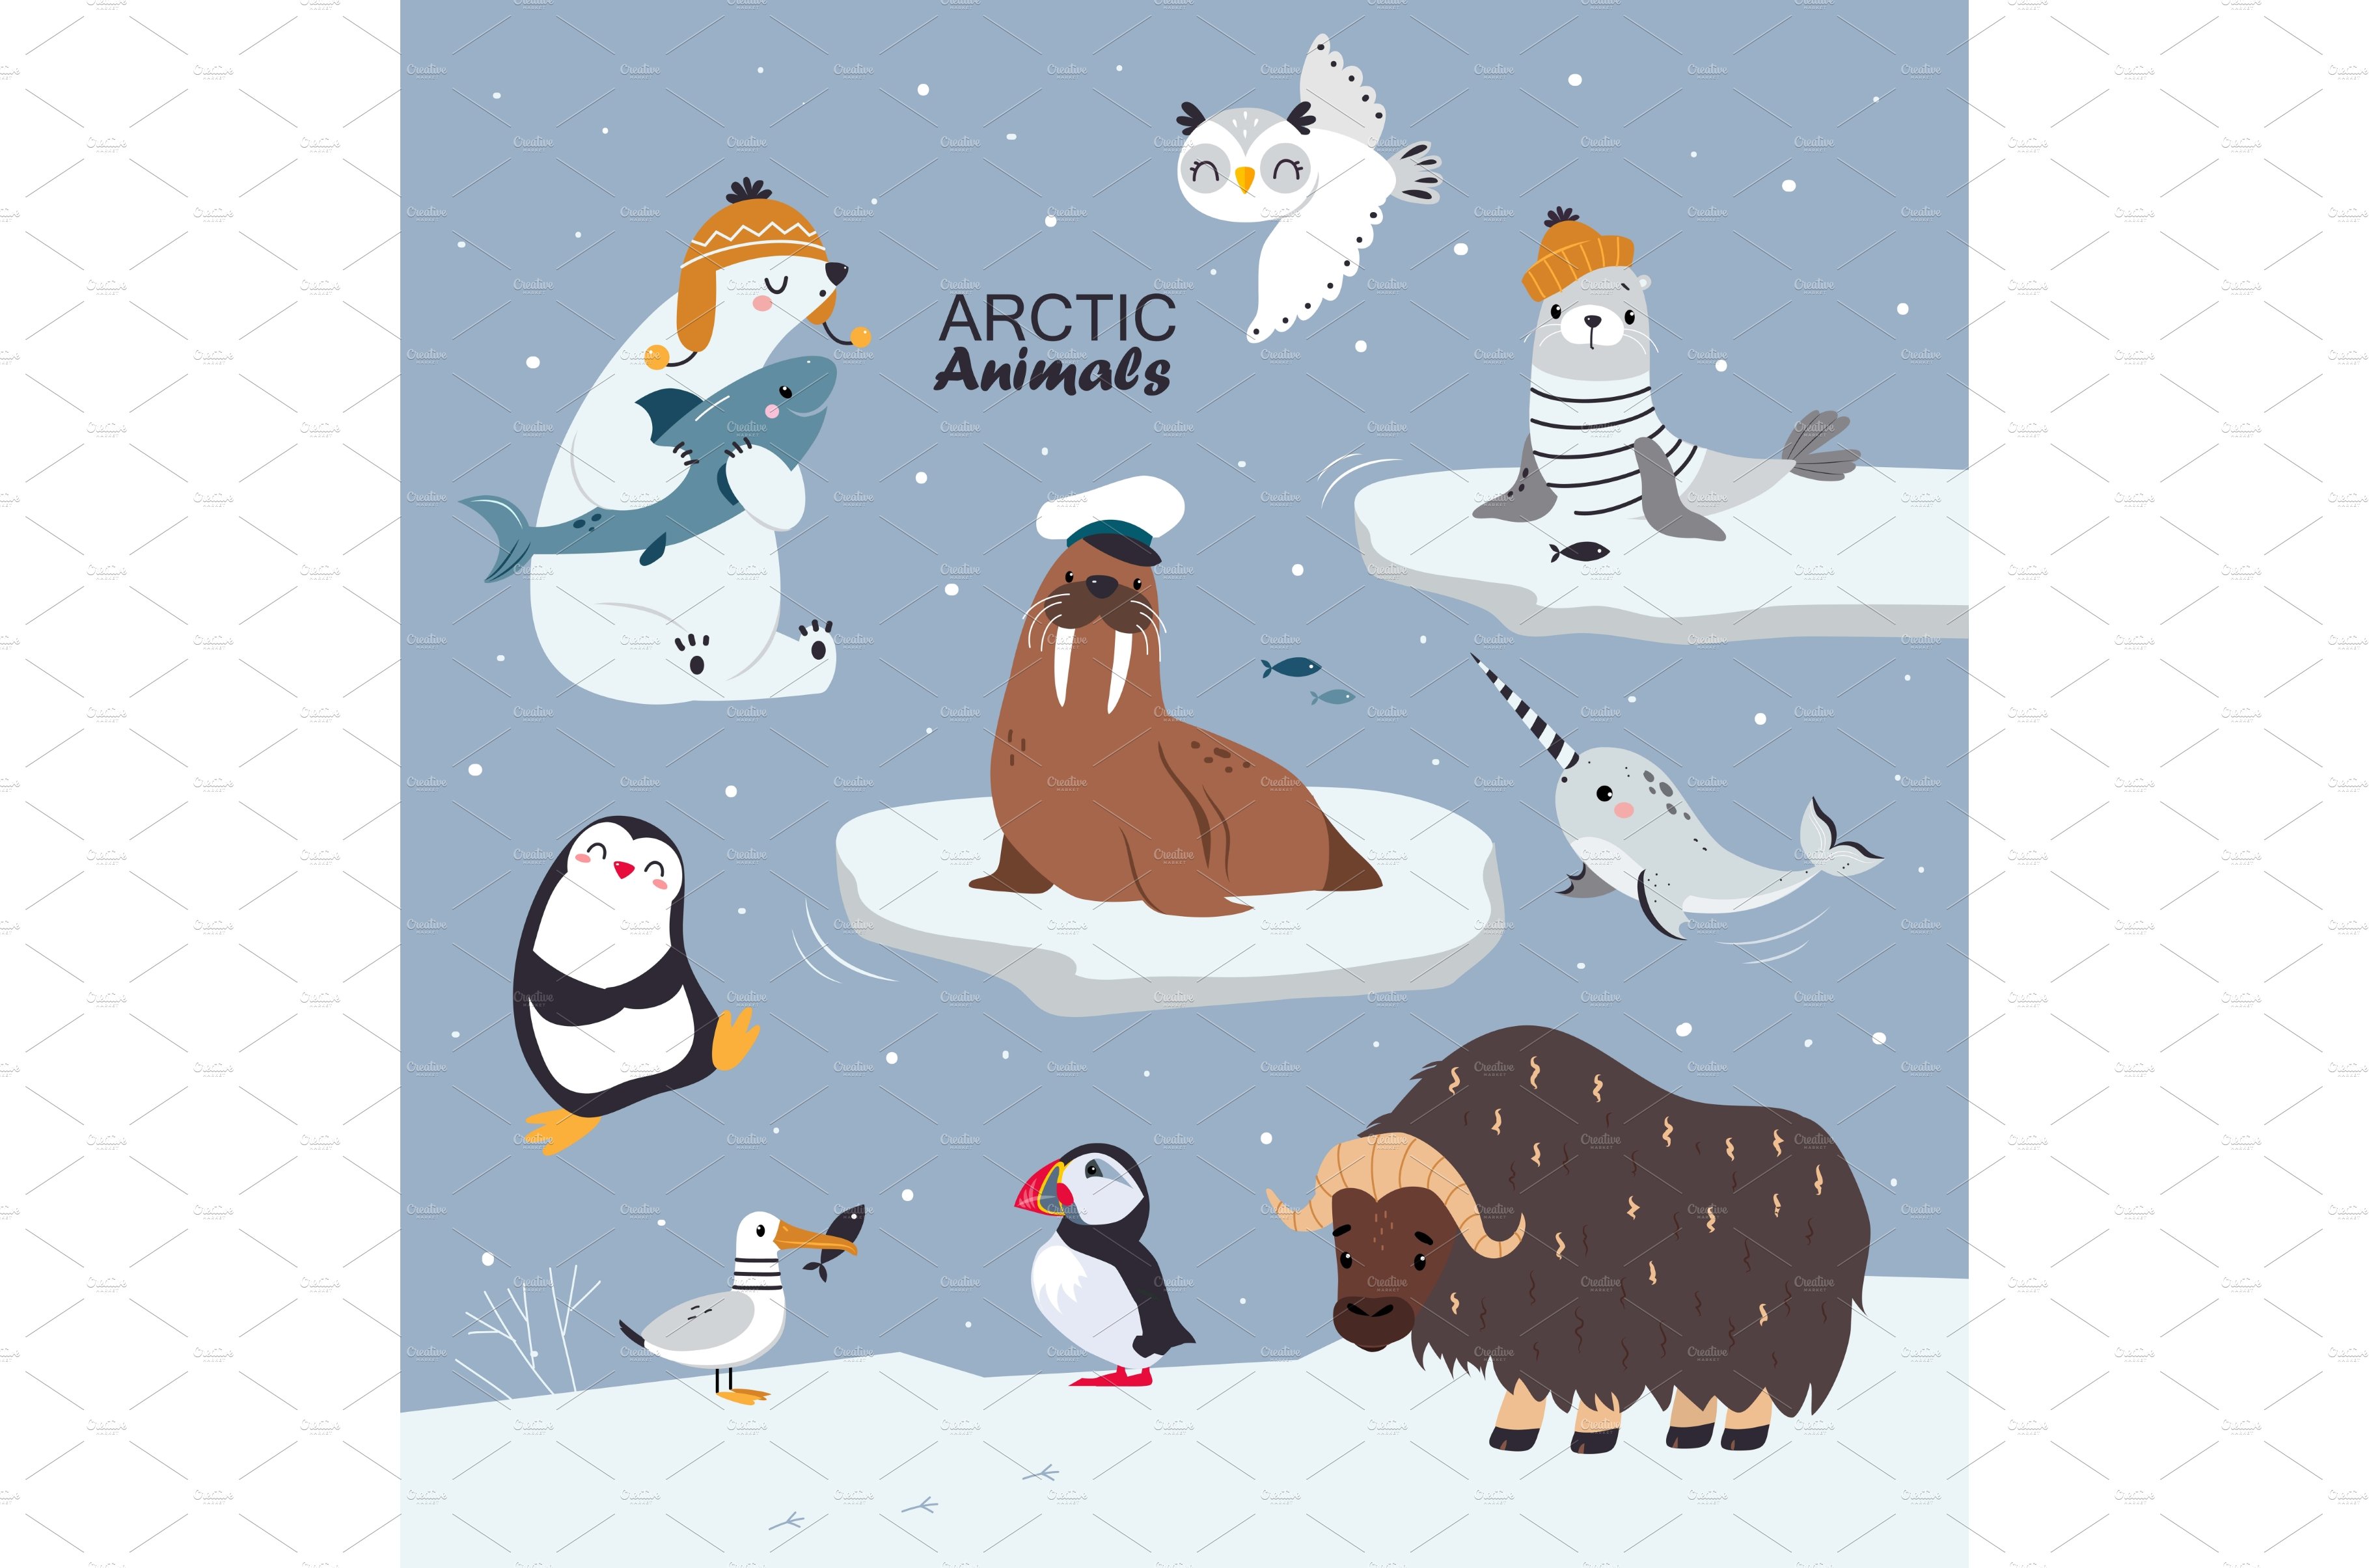 Arctic Animal with Penguin and cover image.